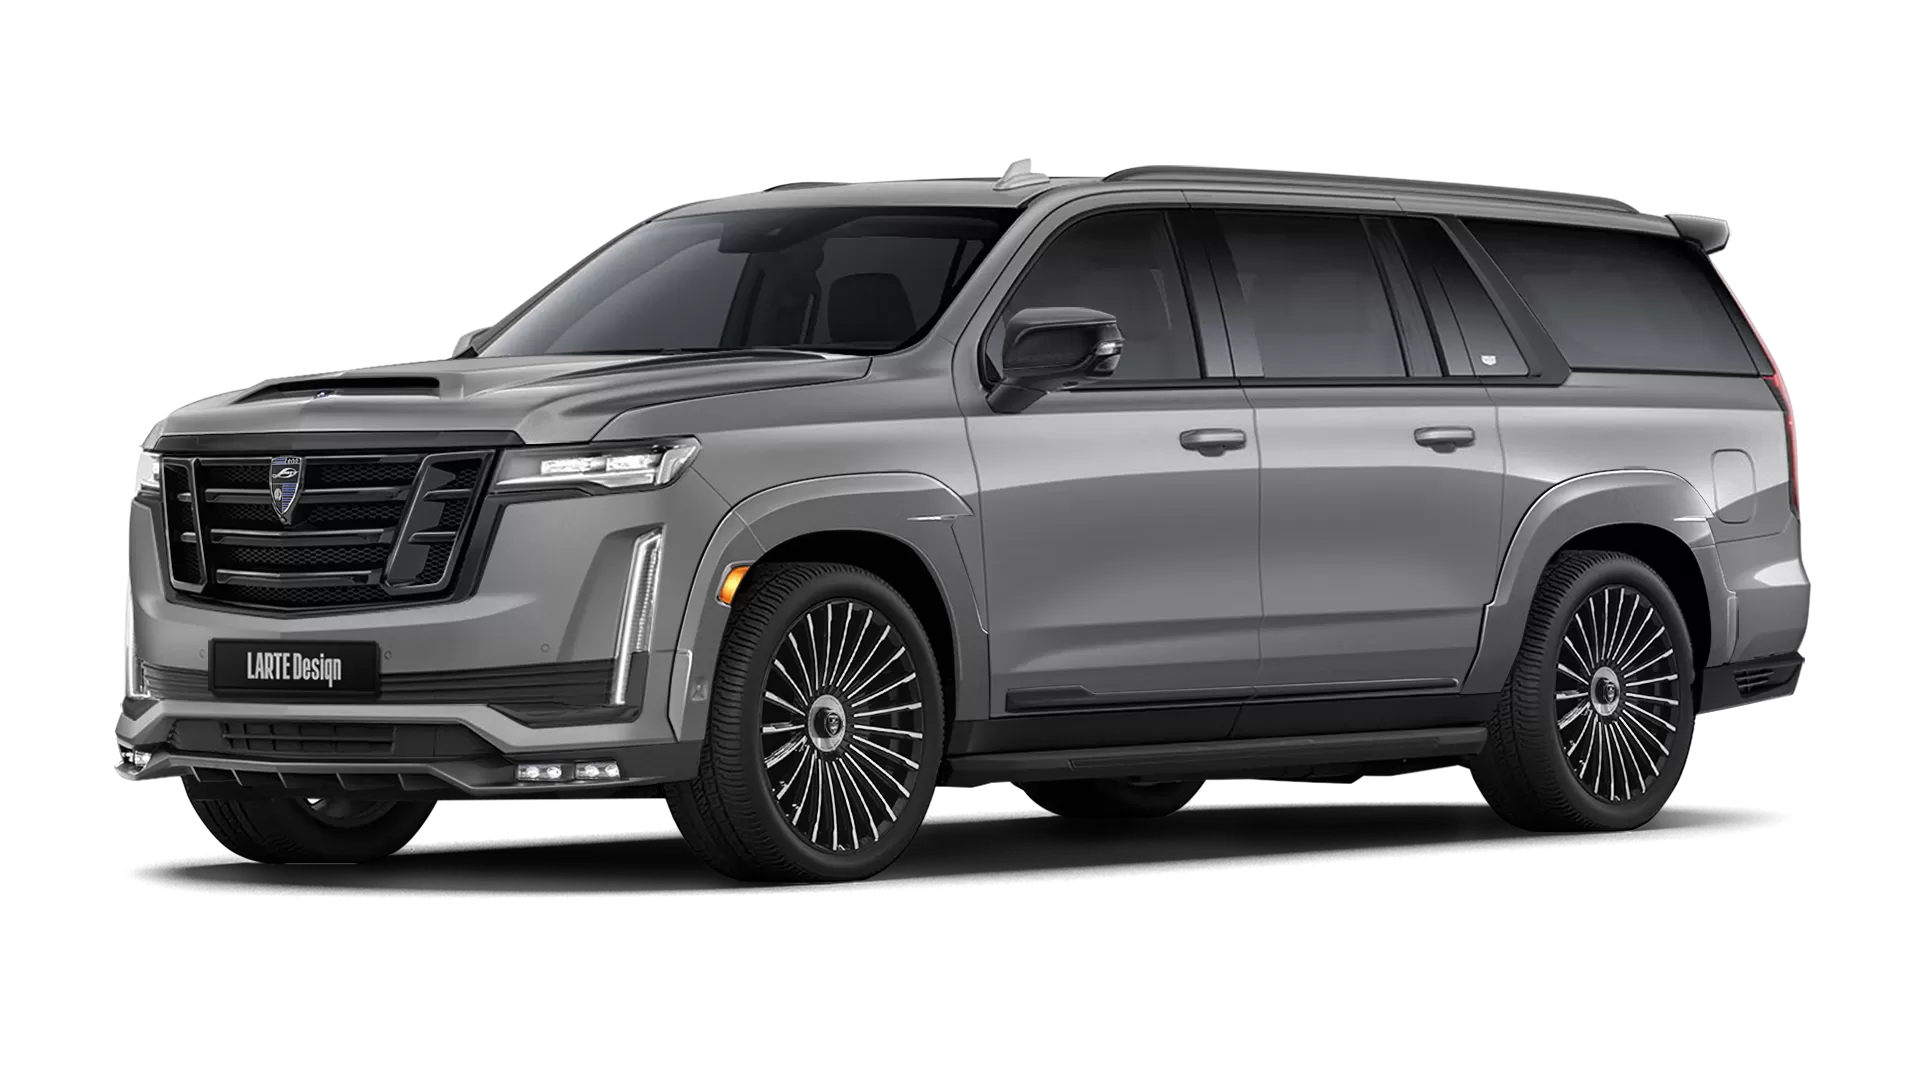 Cadillac Escalade ESV GMT 1XX with painted body kit: front view shown in Satin Steel Metallic